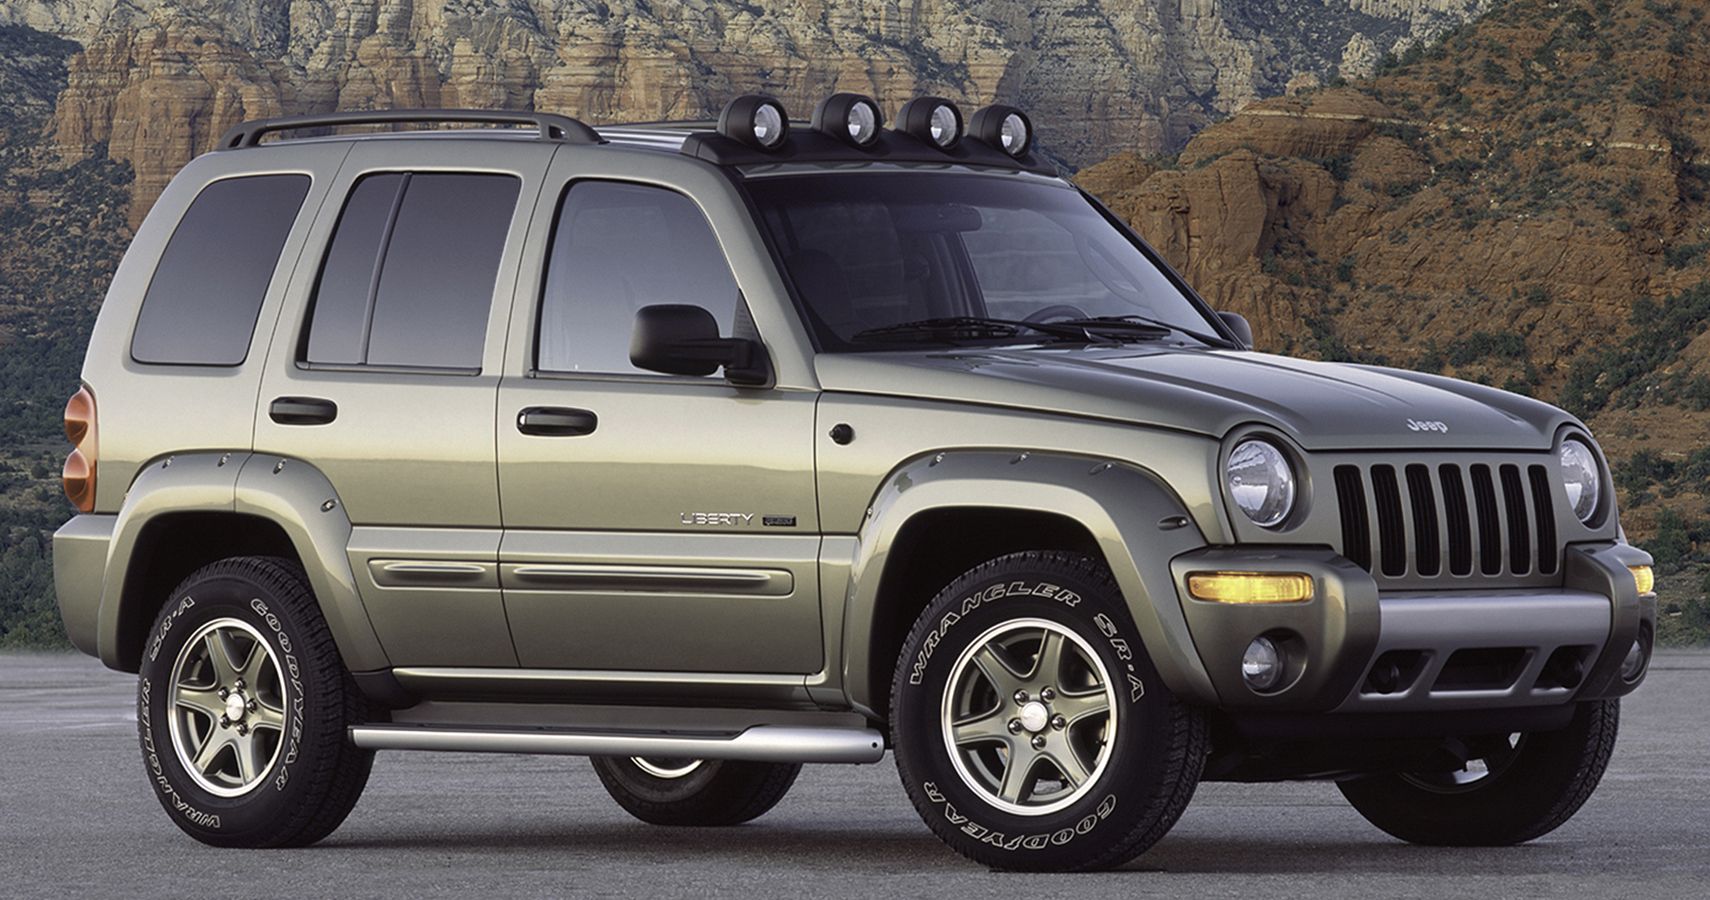 A green 2002 Jeep Liberty is parked at the base of a mountain.